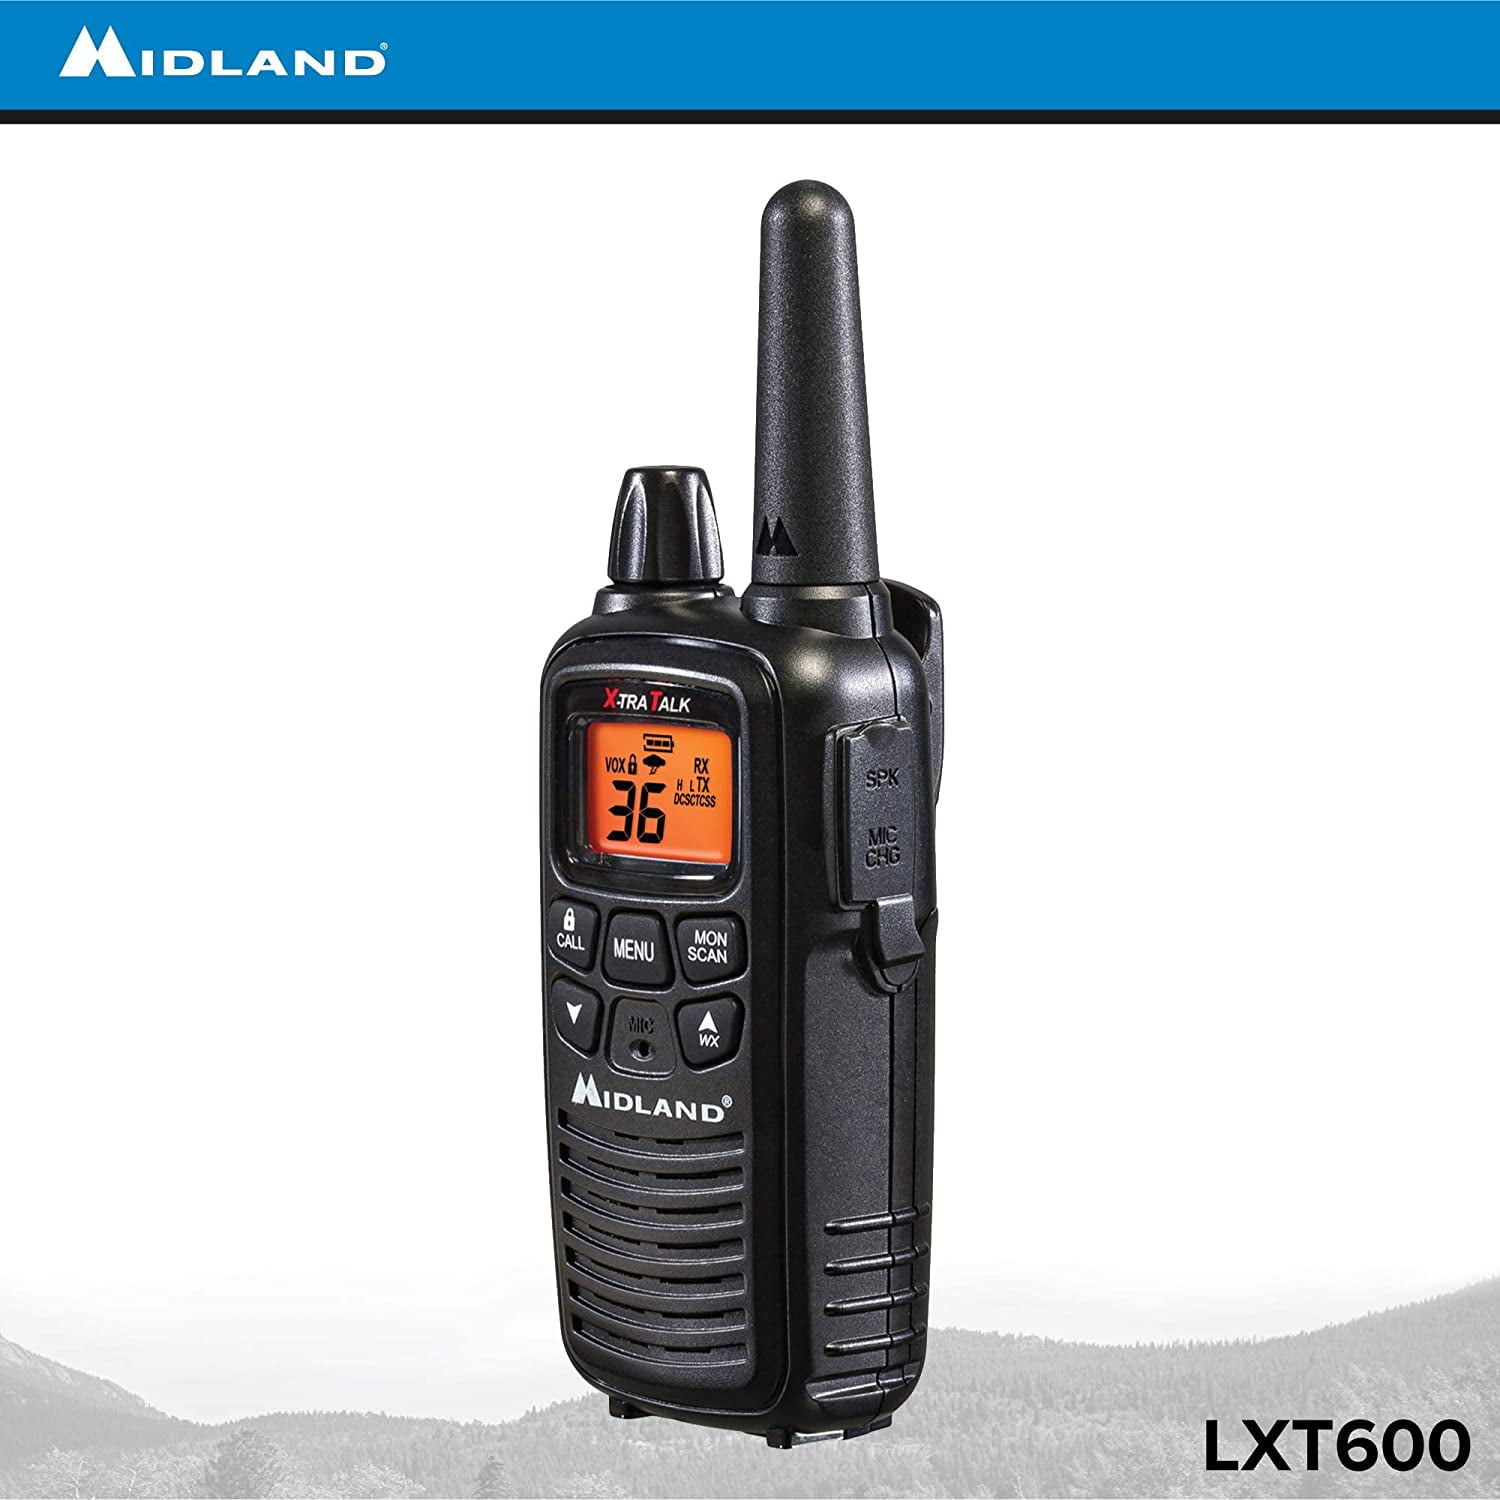 Round down gloss Month Midland - LXT600VP3, 36 Channel FRS Two-Way Radio - Up to 30 Mile Range Walkie  Talkie, 121 Privacy Codes, NOAA Weather Scan + Alert (Pair Pack) (Black),  2-WAY RADIOS -.., By Visit the Midland Store - Walmart.com